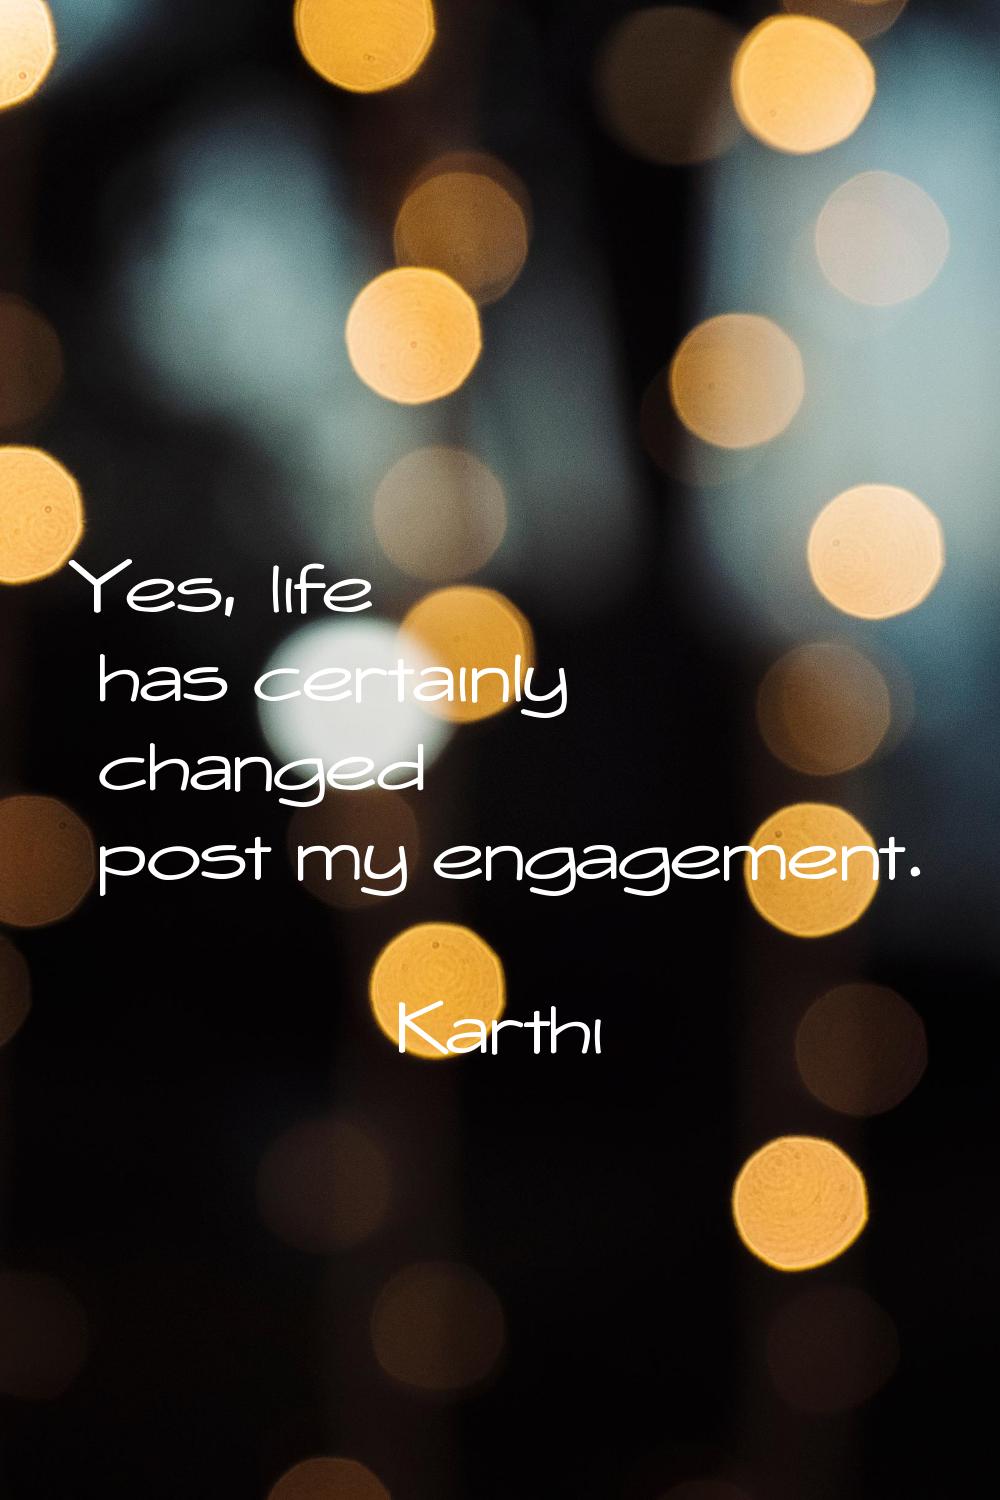 Yes, life has certainly changed post my engagement.